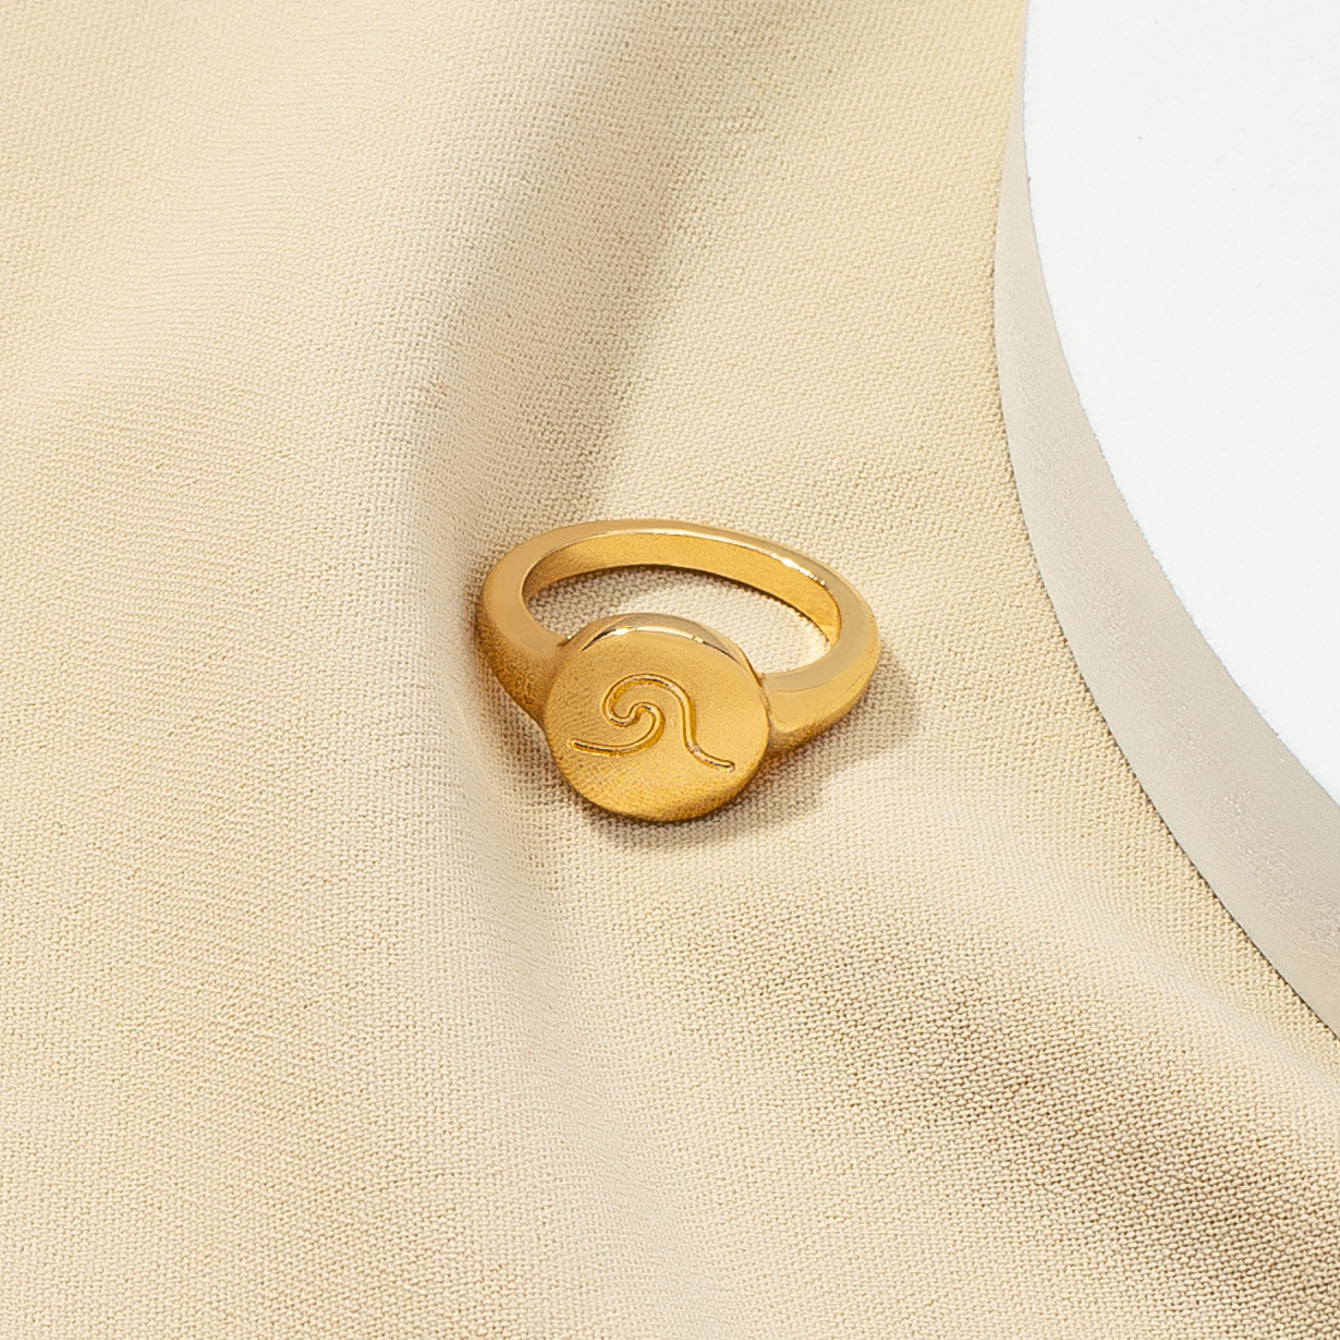 Wave Verve Ring - Exquisite Fashion Jewelry for Global Trendsetters